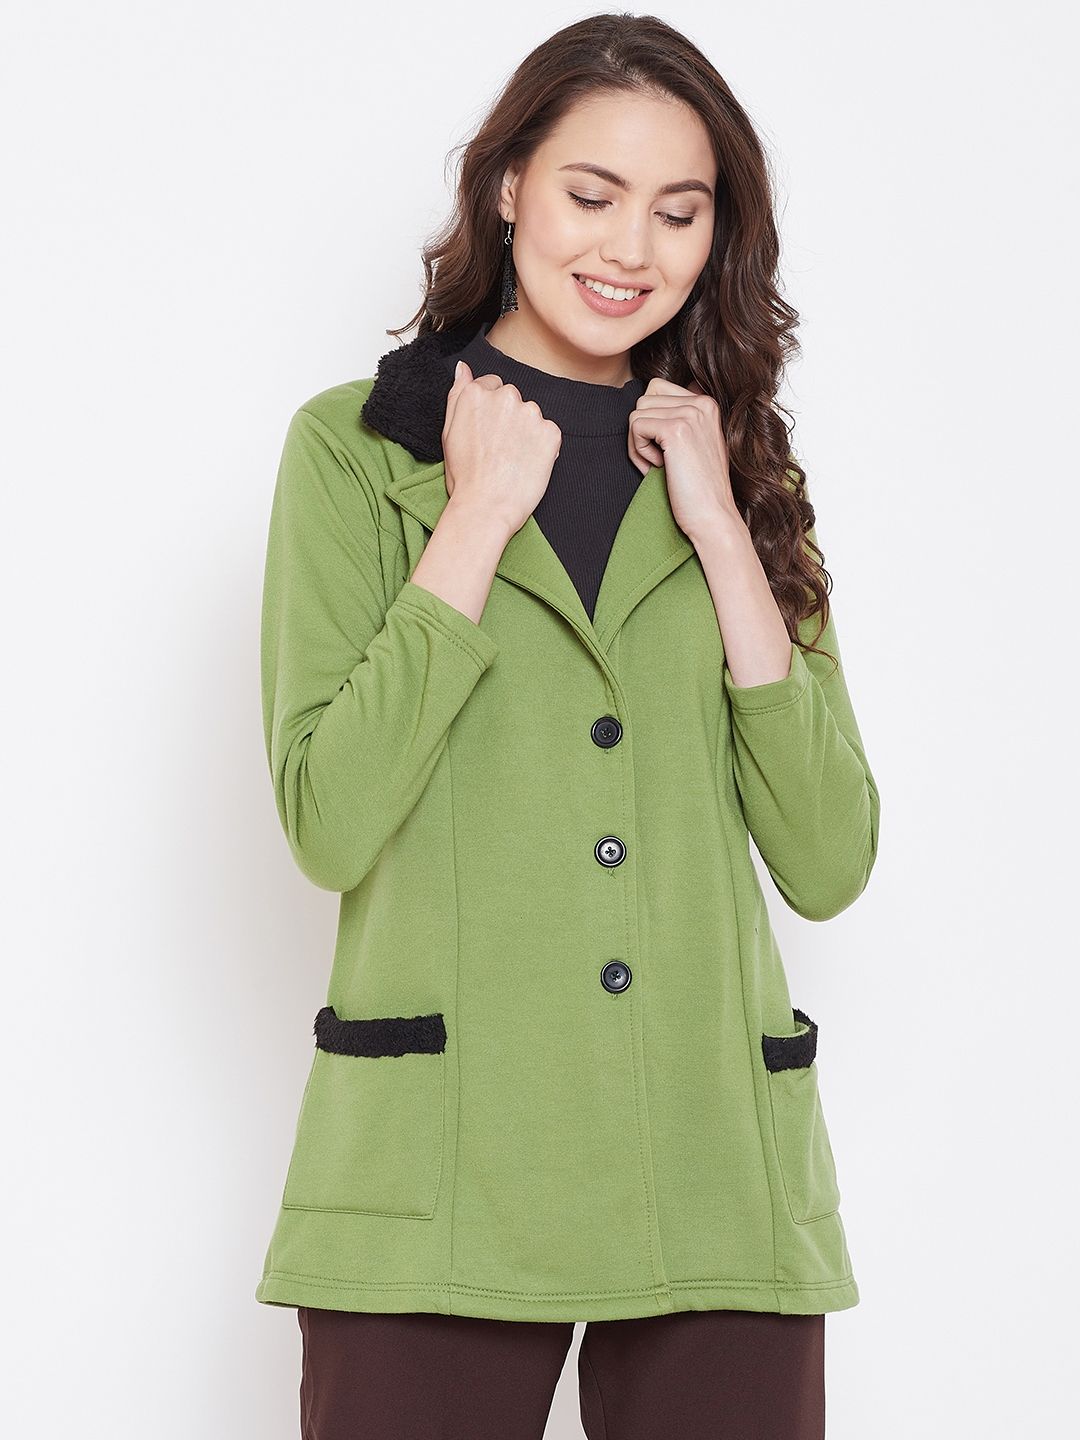 Belle Fille Women Green Solid Tailored Jacket Price in India